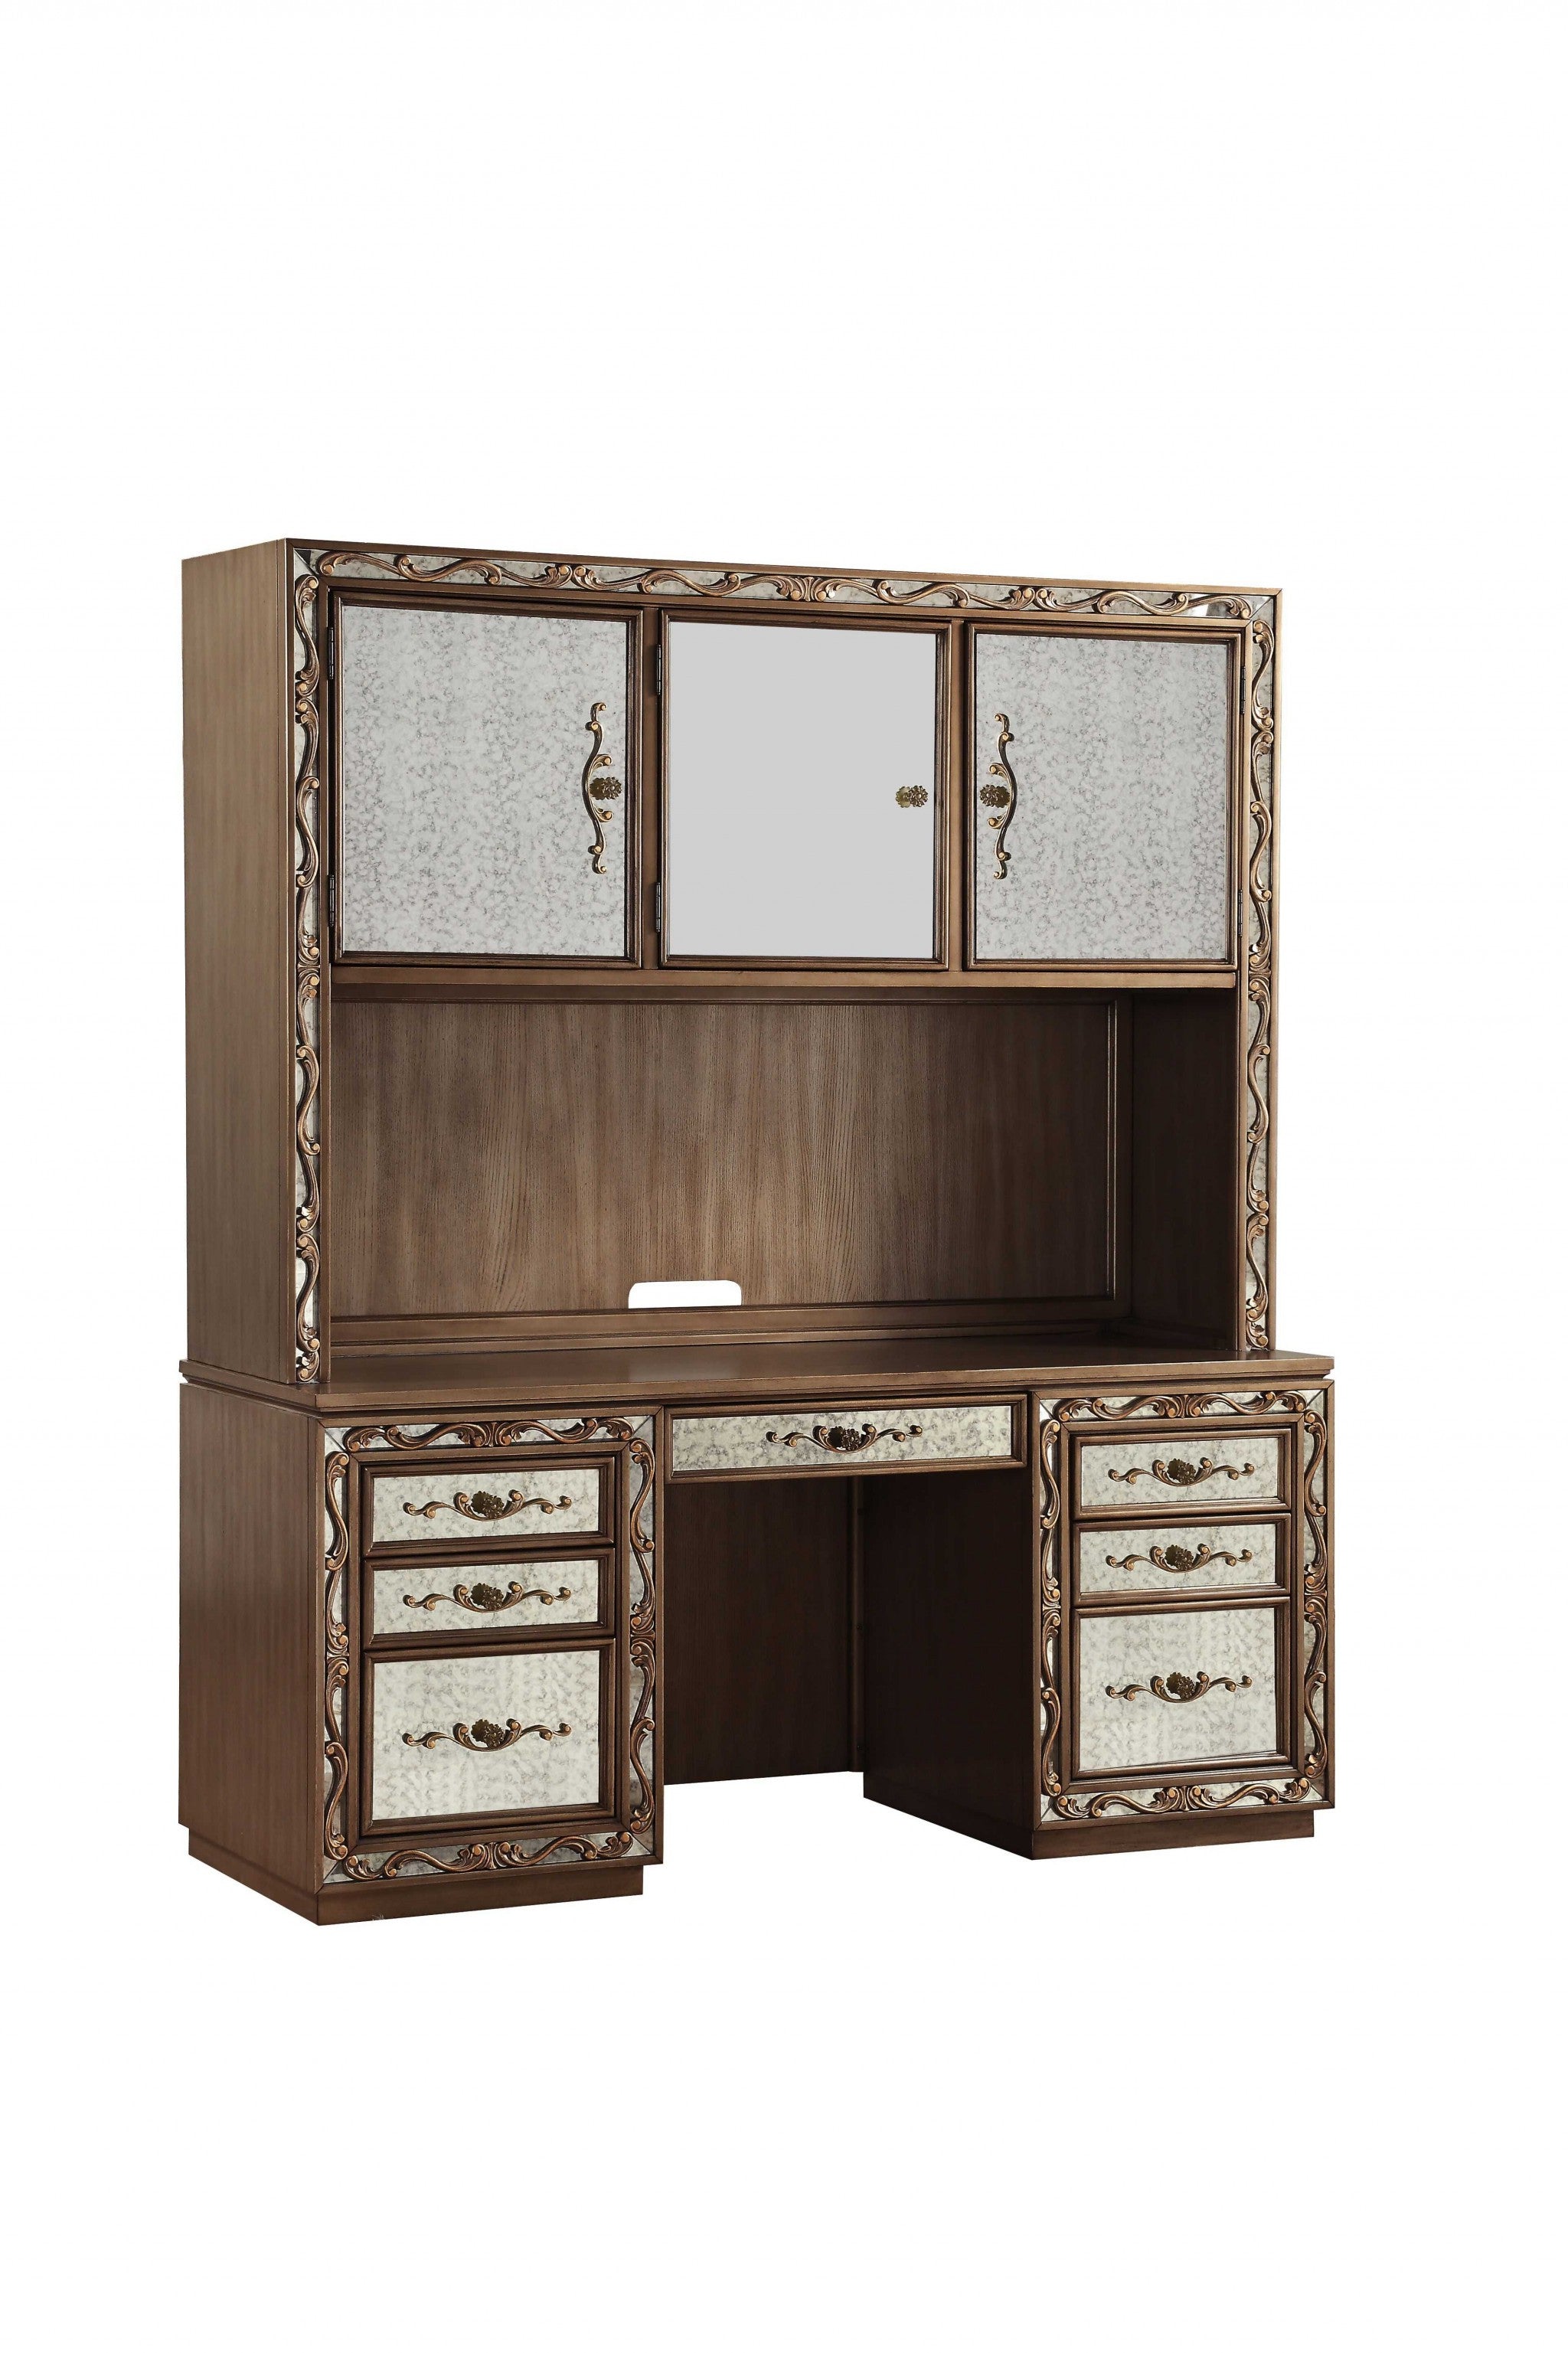 24" Gold Credenza Desk With Three Cabinets Seven Drawers